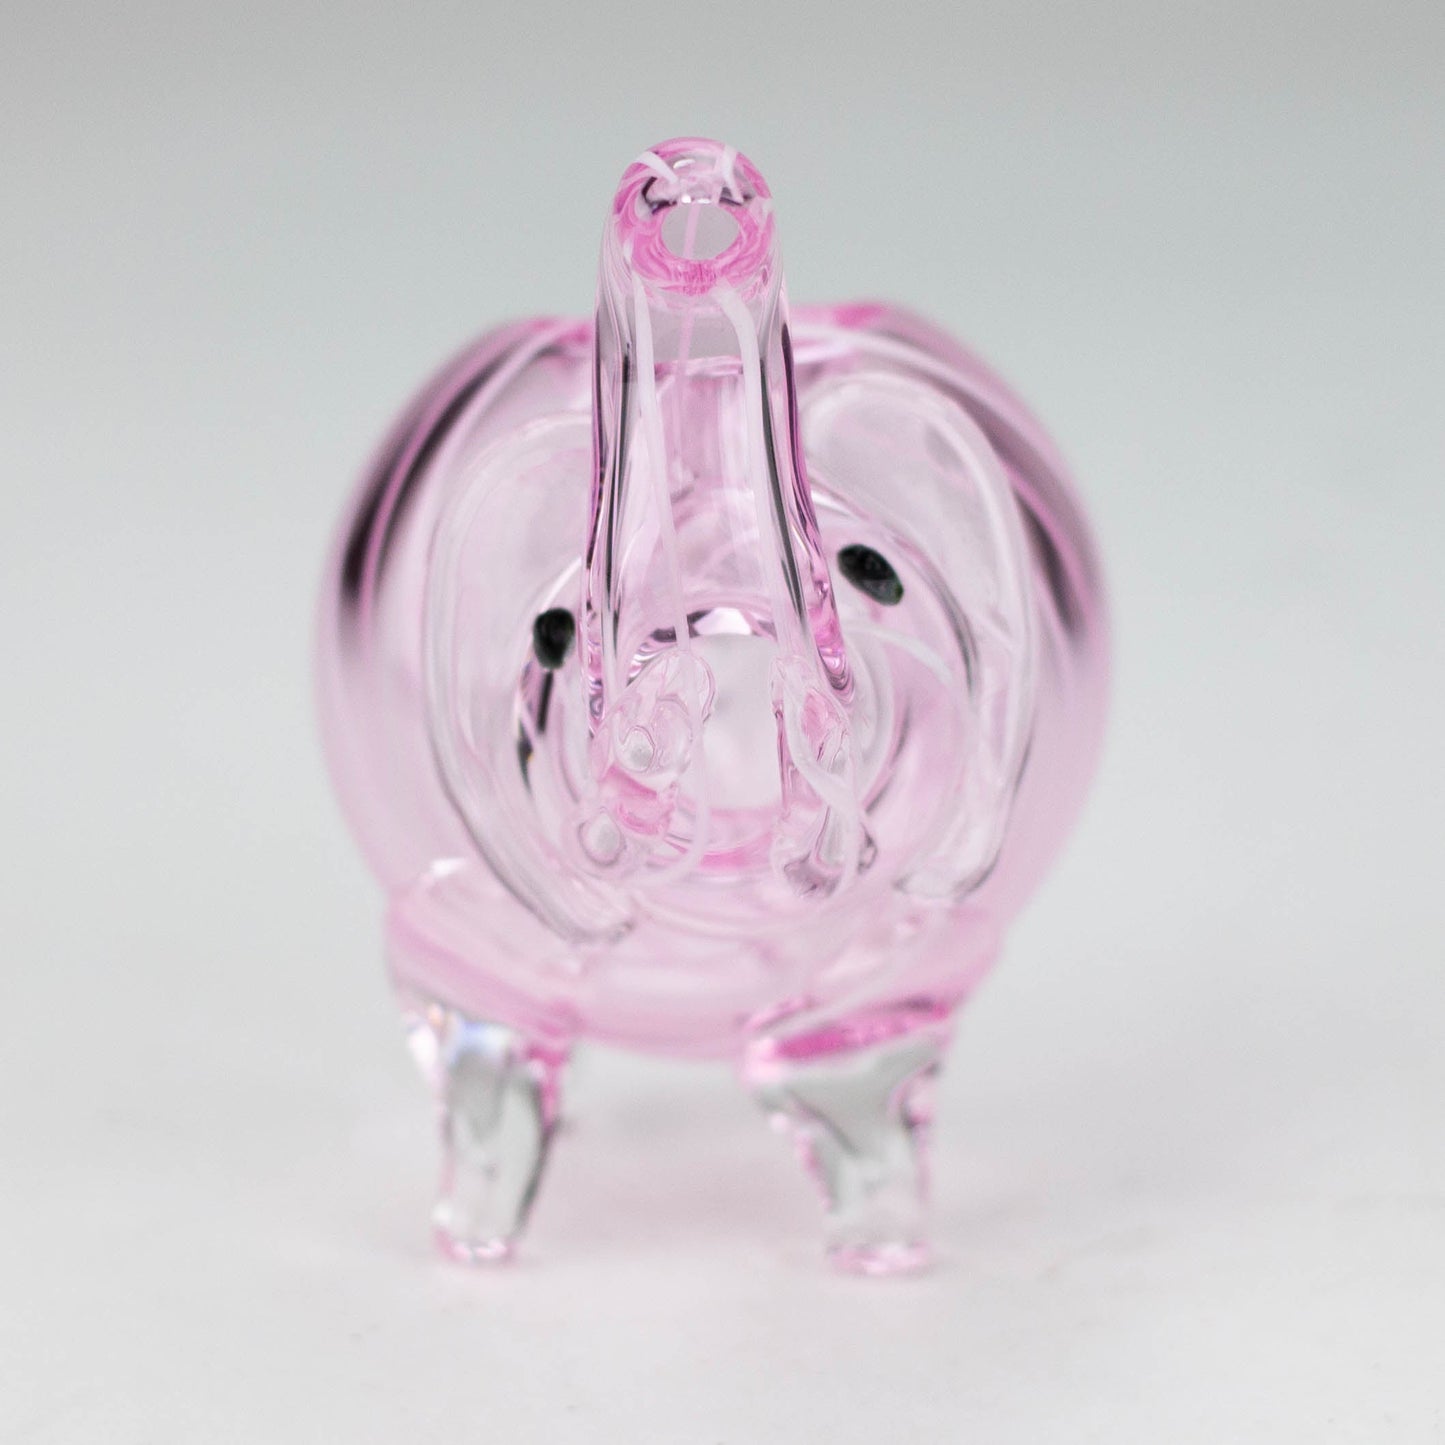 5" Standing elephant color glass hand pipe_4